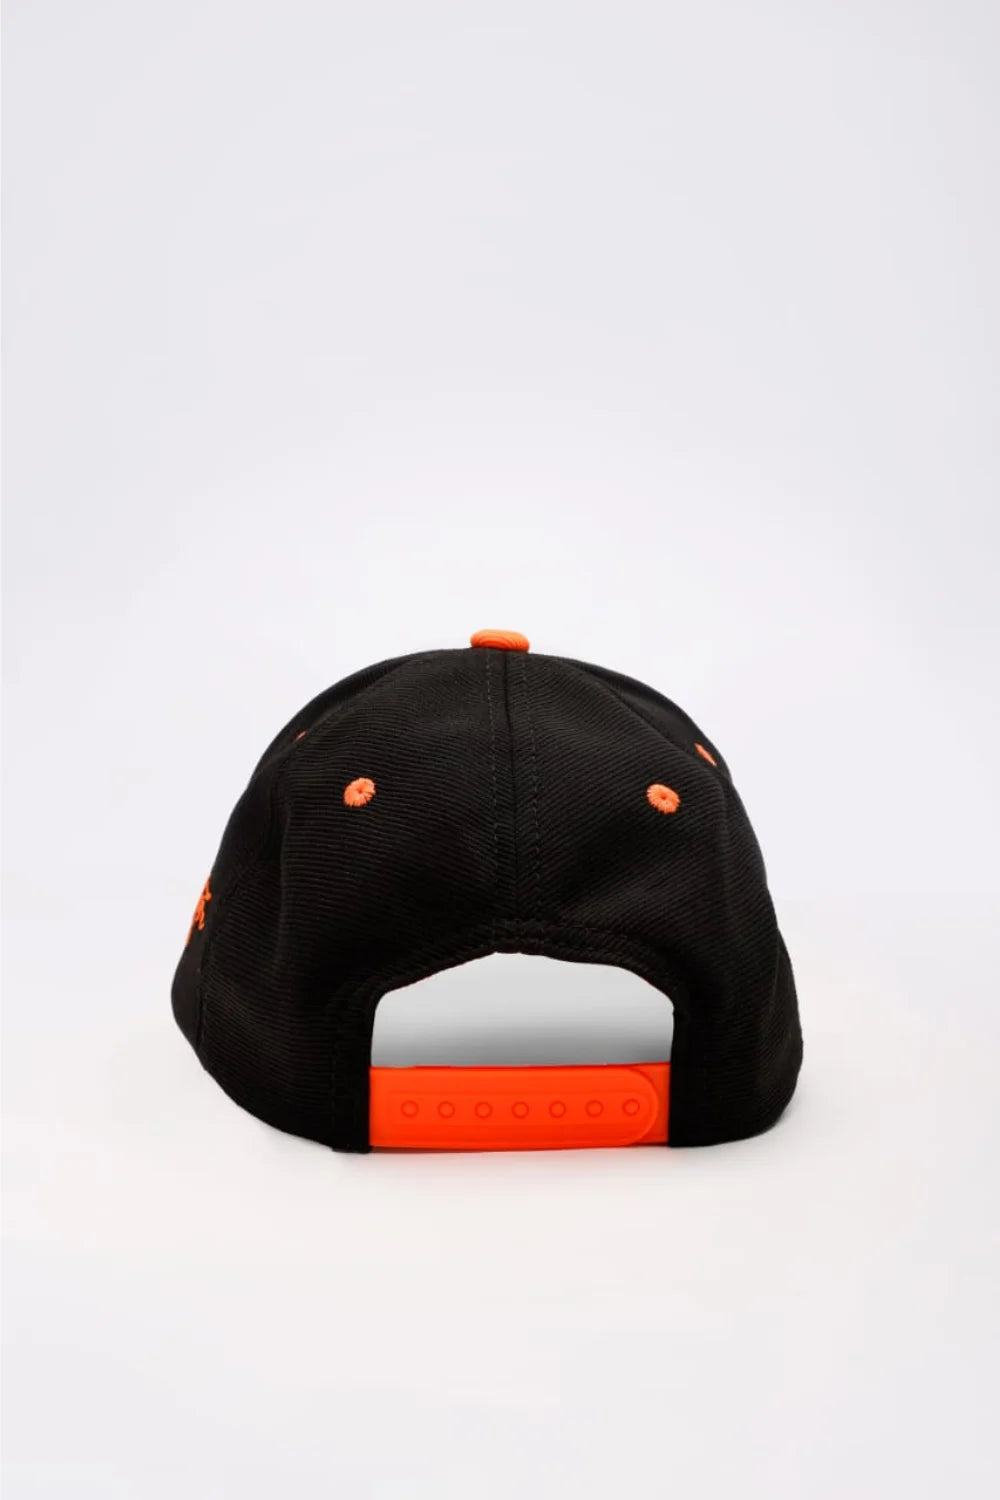 Unisex Tri Color solid baseball cap, has a visor by one player